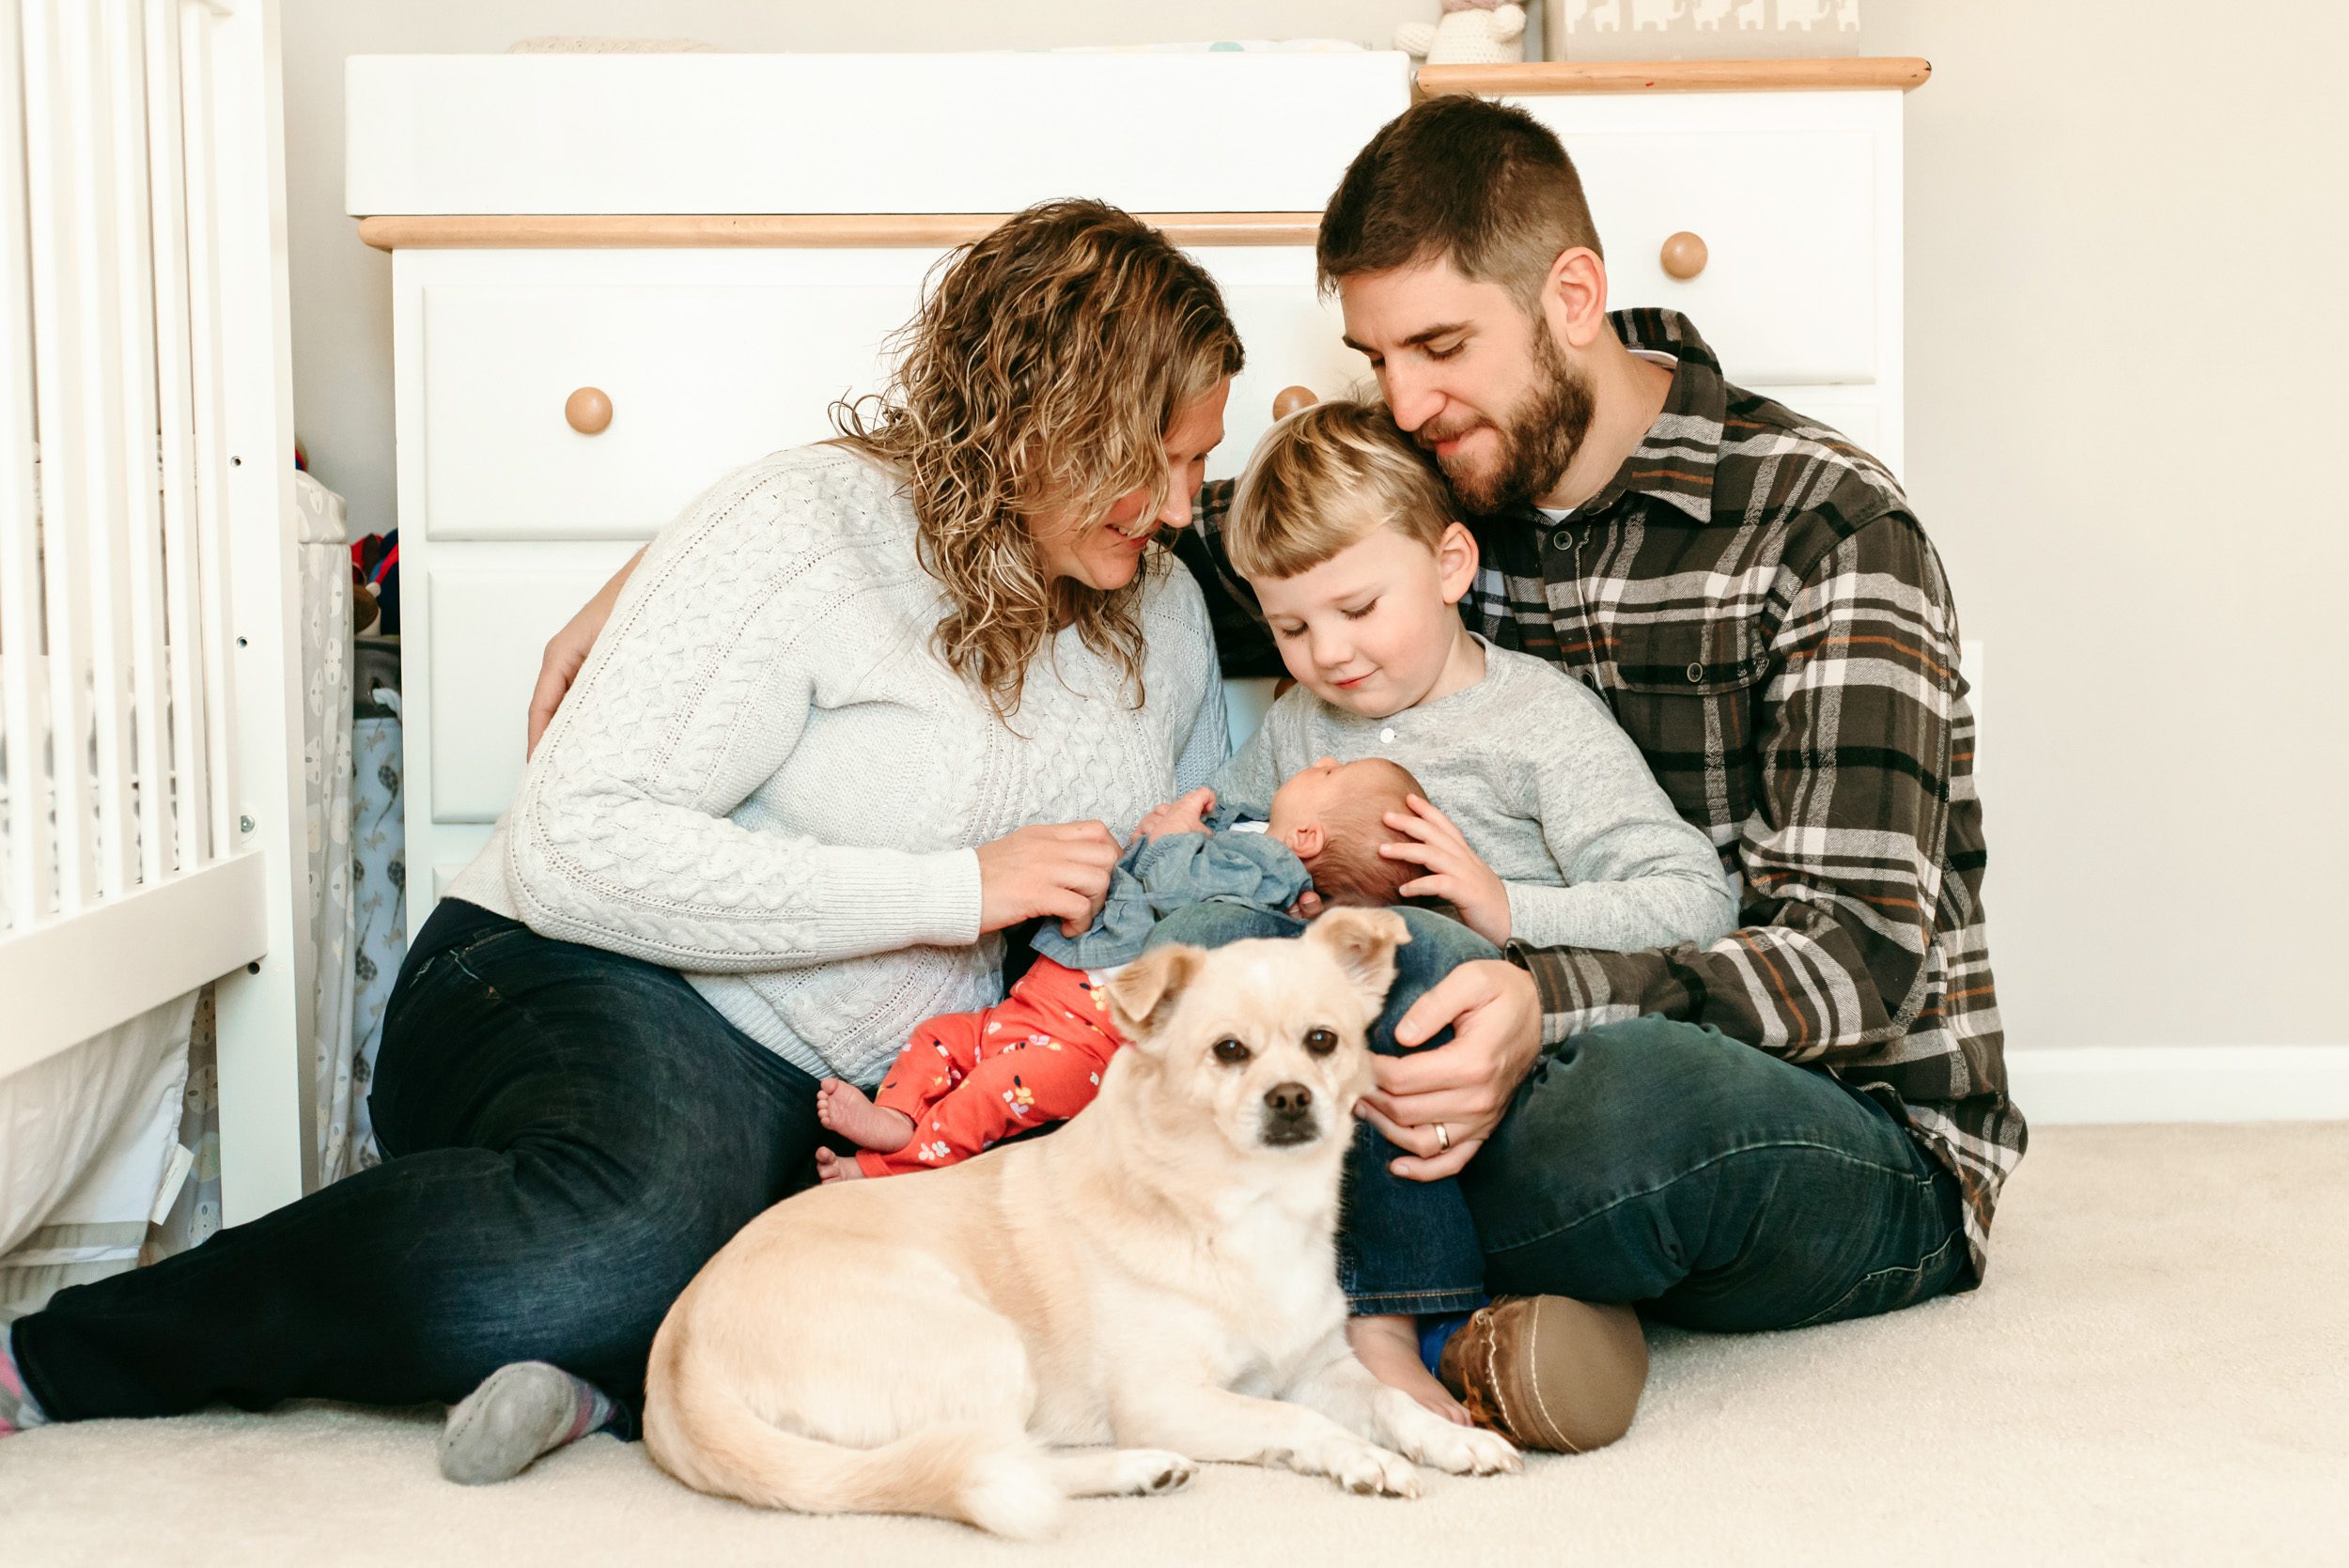 Family picture of parents and older brother smiling at their new baby girl with the family dog laying in front of them during a natural newborn photo session